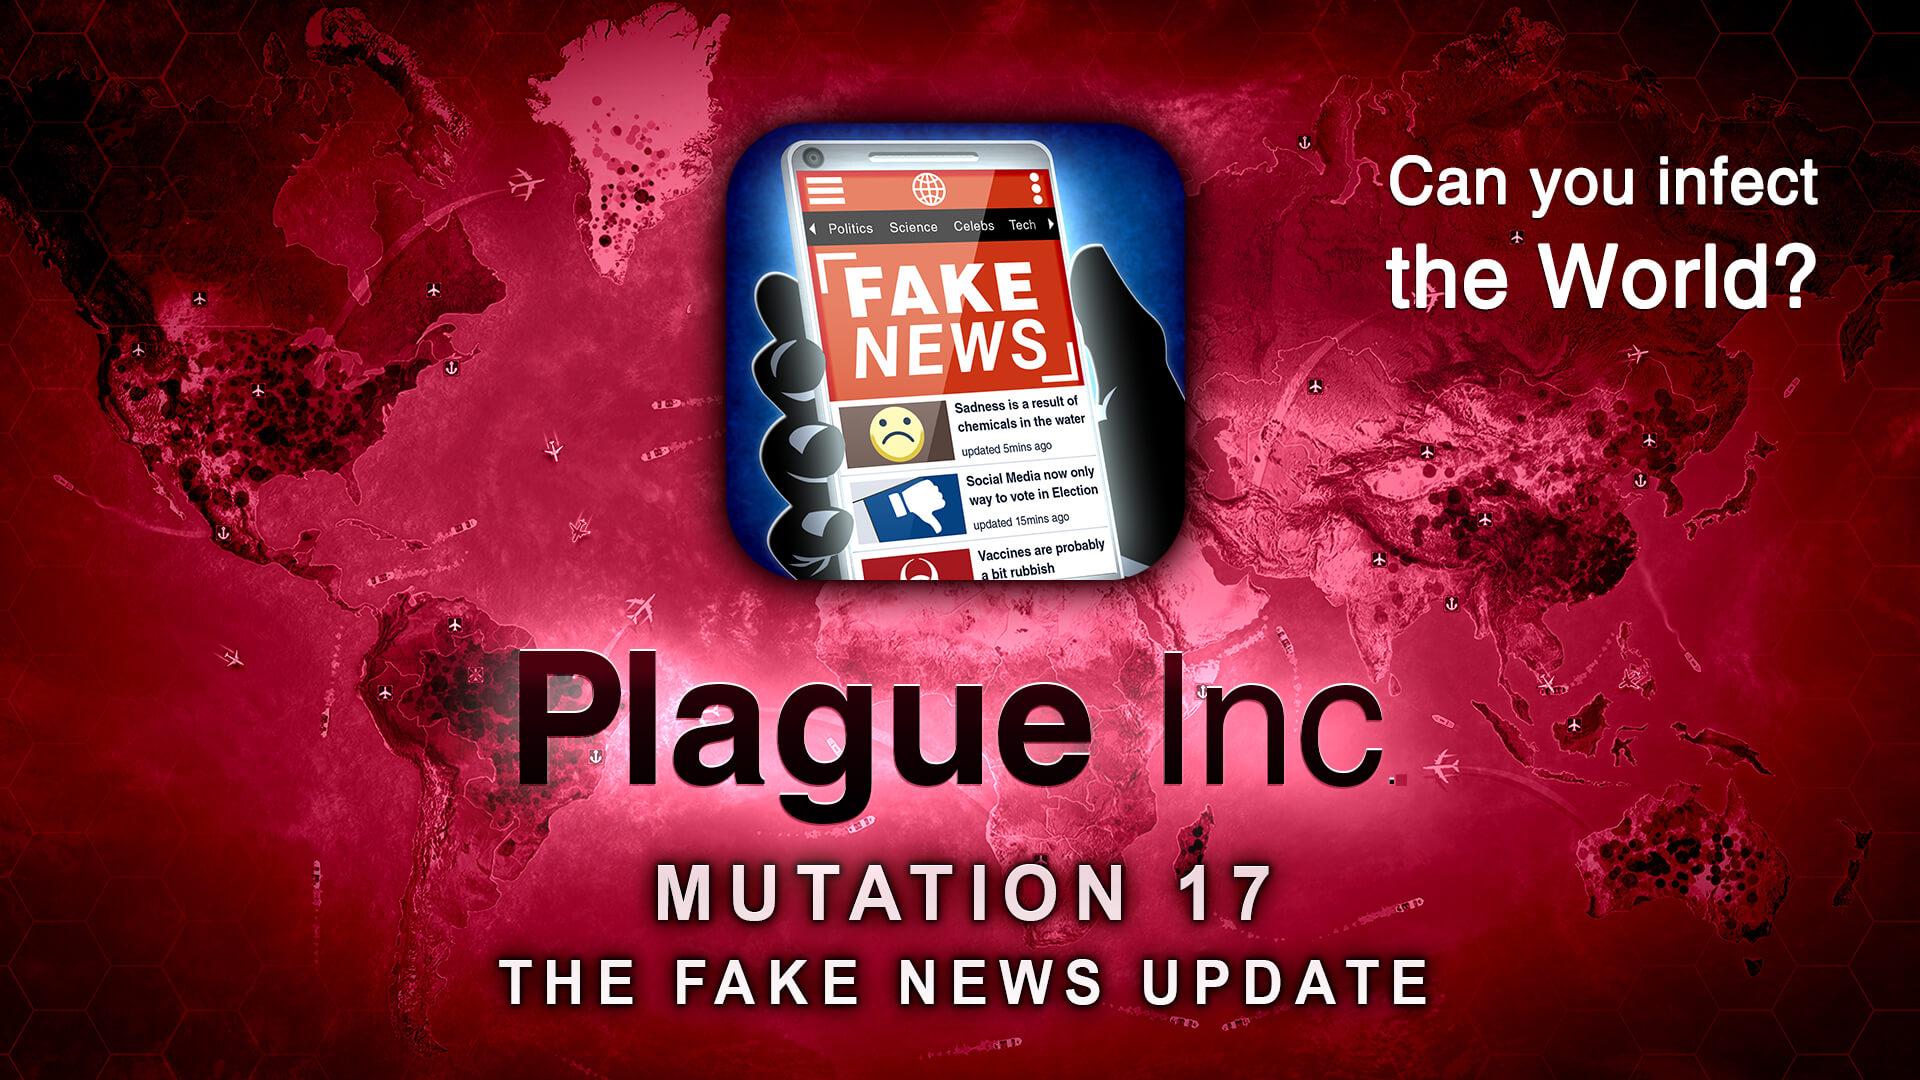 Plague Inc. joins the fight against Fake News! - Ndemic Creations